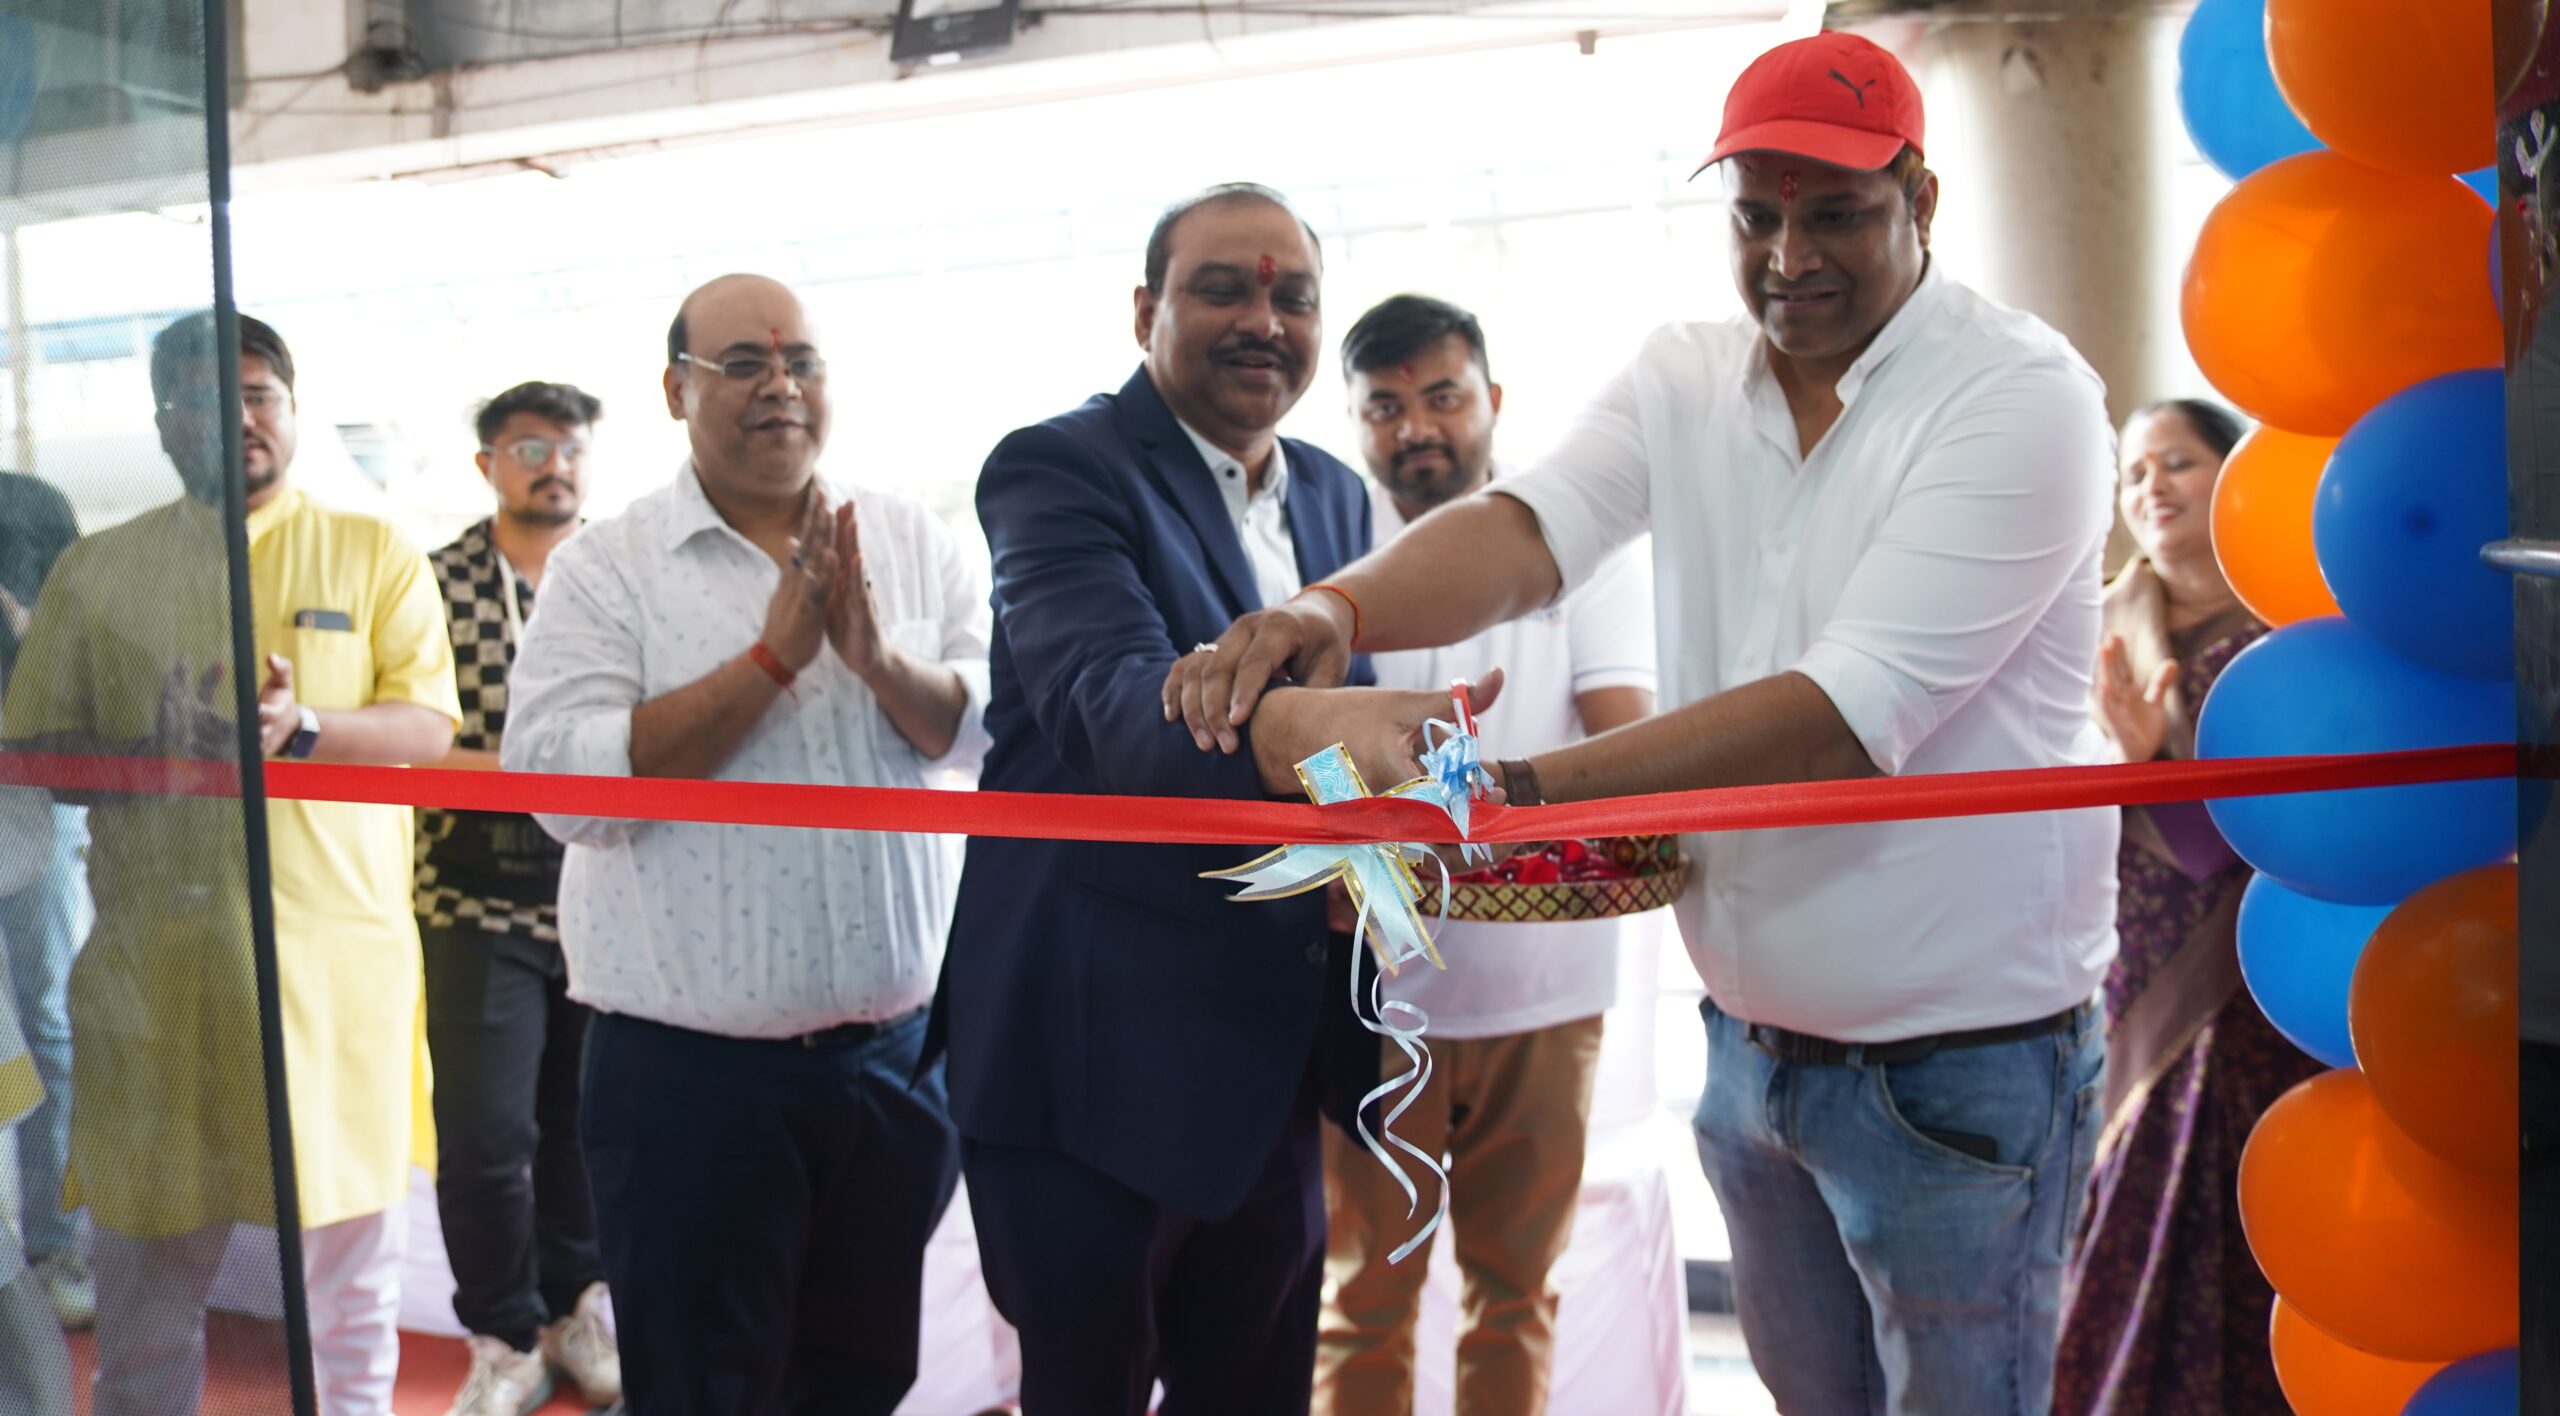 Southern Travels expands wings with new branch in Chhattisgarh